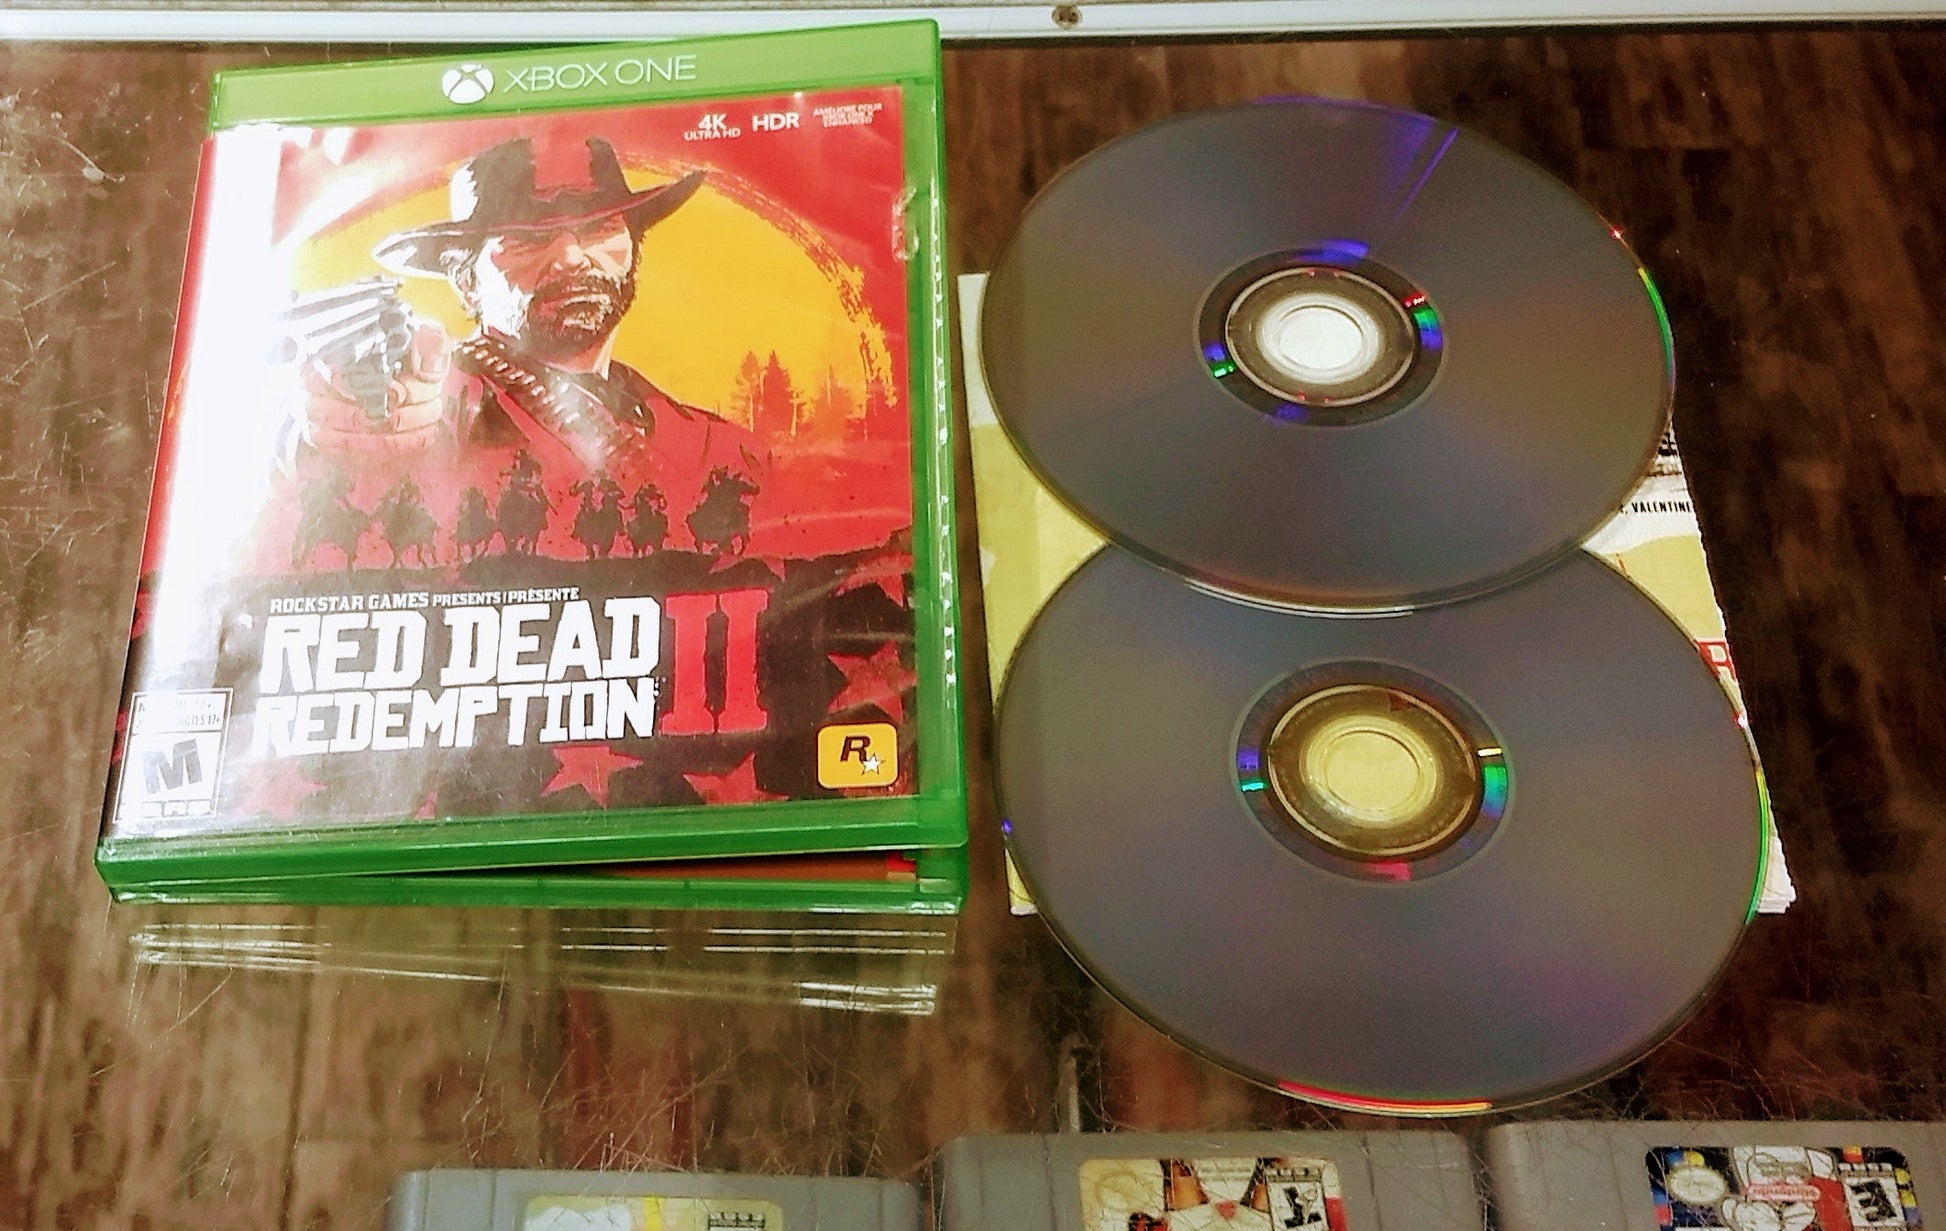 RED DEAD REDEMPTION II 2 XBOX ONE XONE - jeux video game-x